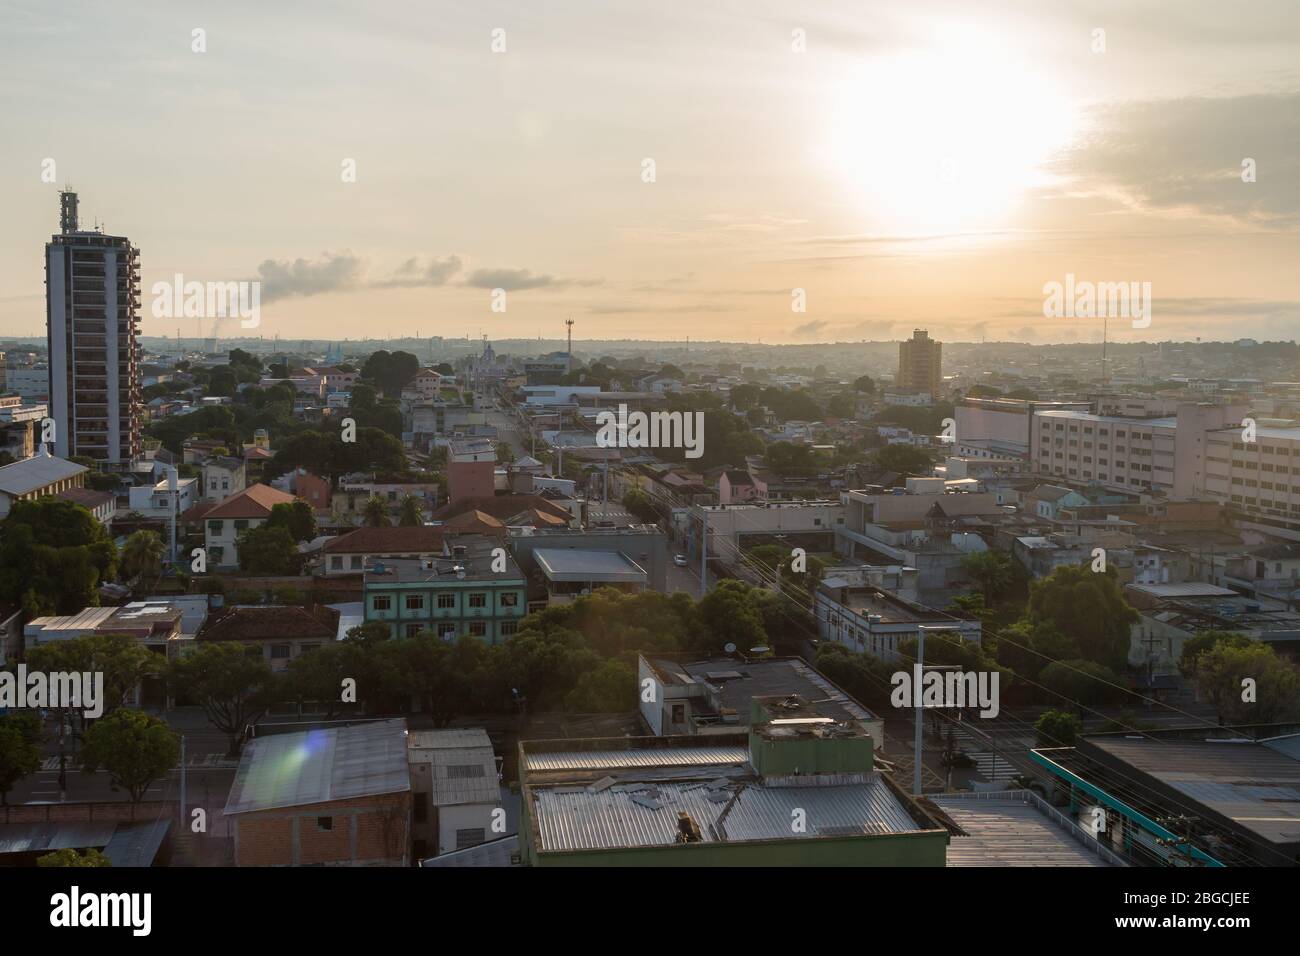 View over the skyline of Manaus, the capital city of the Brazilian state of Amazonas. Stock Photo